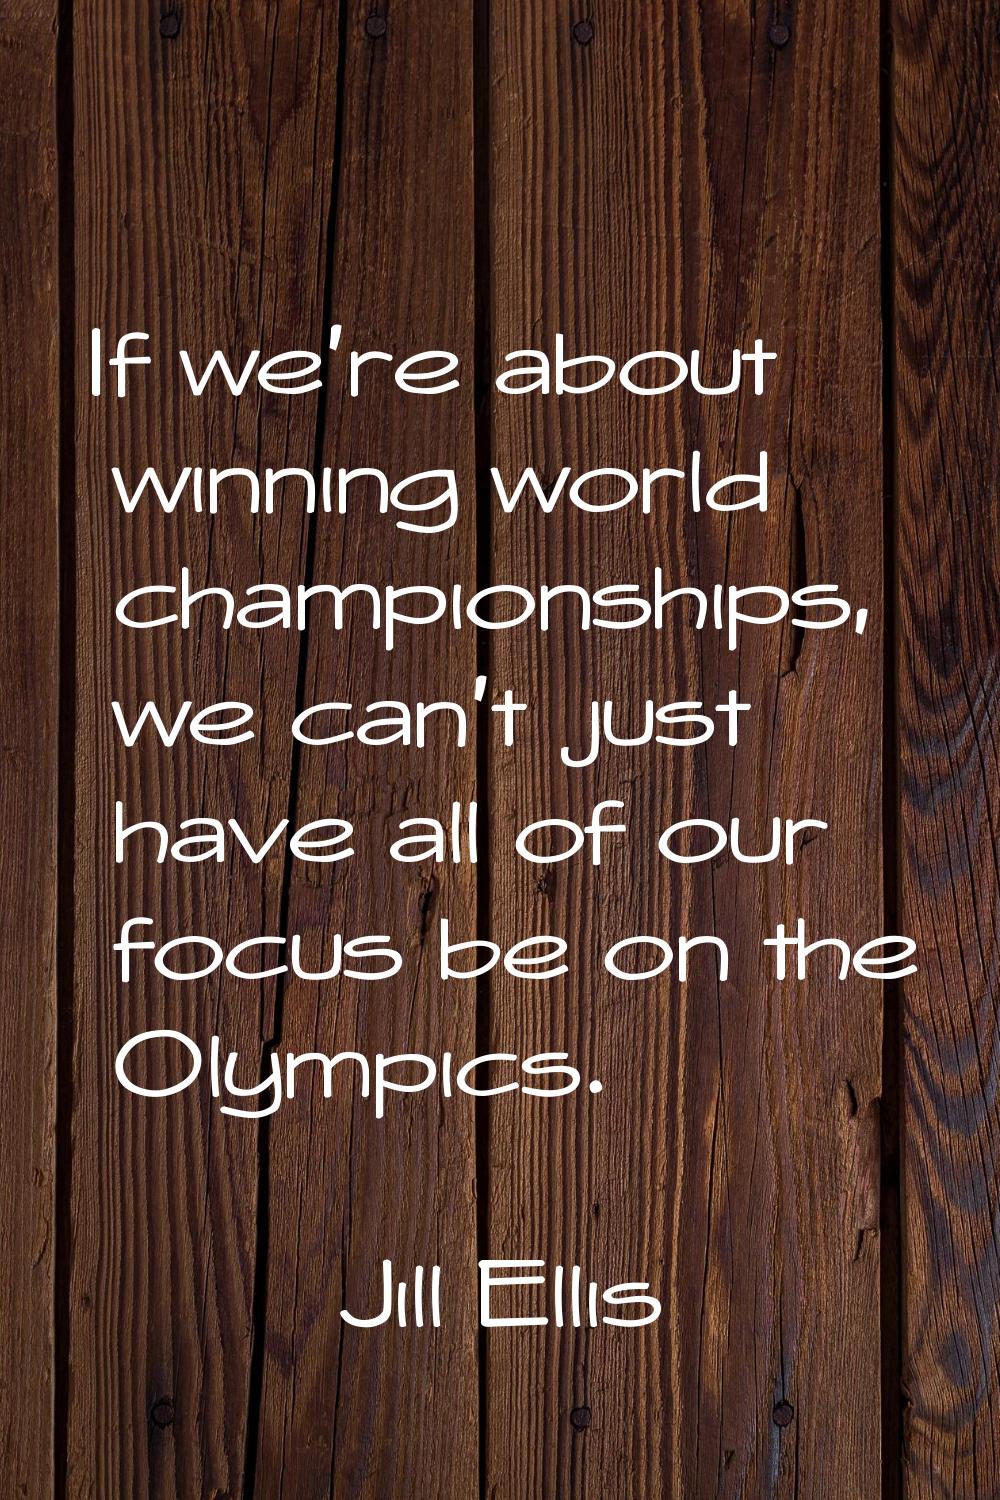 If we're about winning world championships, we can't just have all of our focus be on the Olympics.